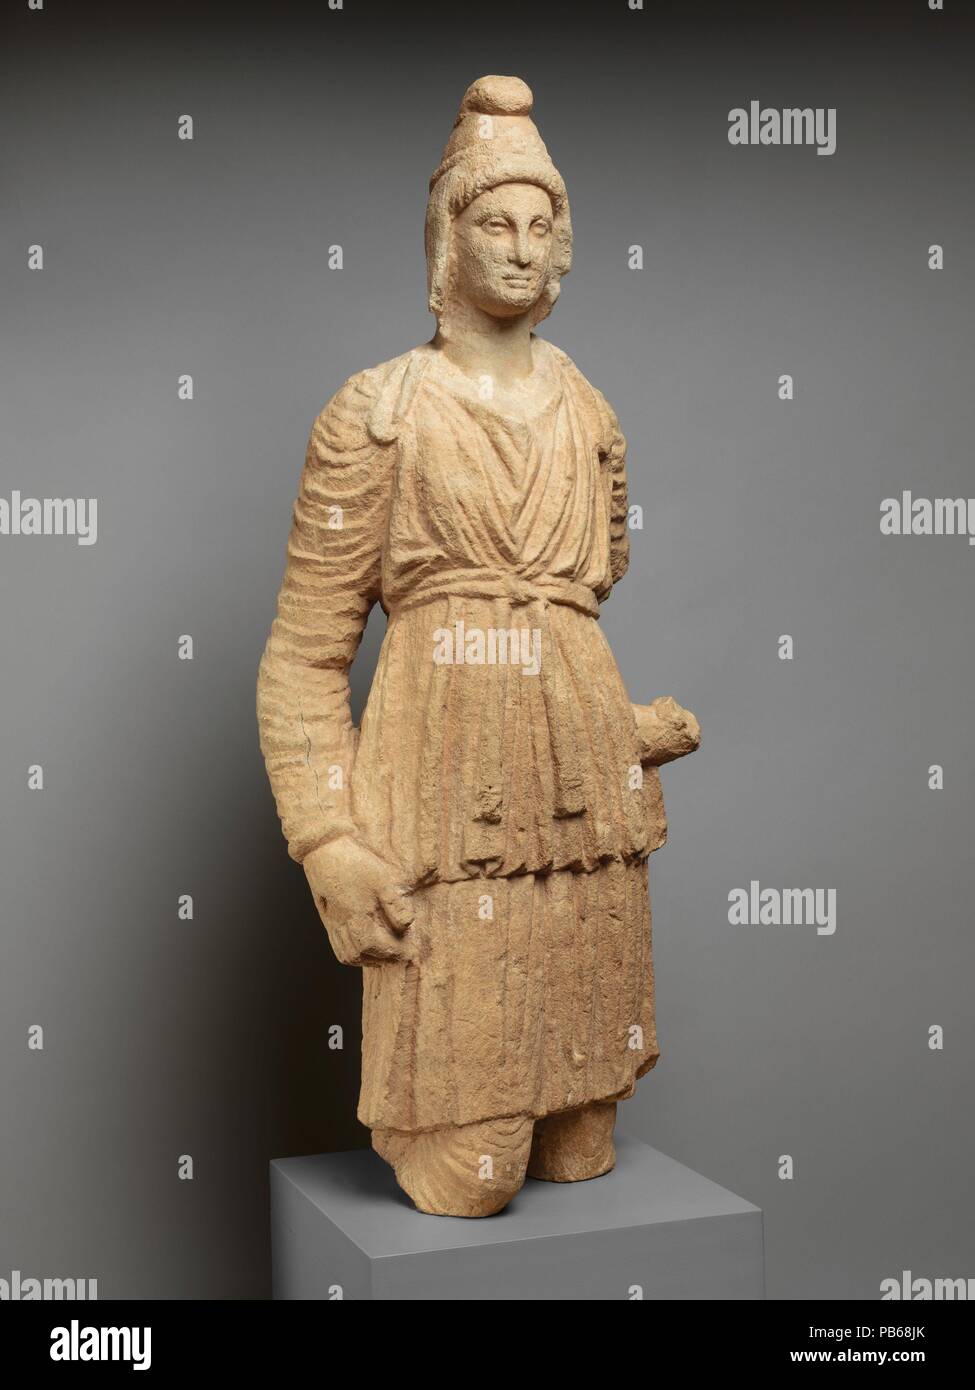 Limestone statue of Artemis Bendis. Culture: Cypriot. Dimensions: 30 3/4 x 12 3/4 x 7 1/4 in.  (78.1 x 32.4 x 18.4 cm). Date: ca. 3rd century B.C..  The head and the body come from different statues. Bendis was a goddess of the hunt, similar to Artemis. Her worship originated in Thrace, a rugged mountainous region in what is today Bulgaria, but became fairly widespread throughout the Greek world by the Hellenistic period. She wears Oriental dress, with a soft leather Phrygian cap and a long-sleeved tunic and trousers. Museum: Metropolitan Museum of Art, New York, USA. Stock Photo